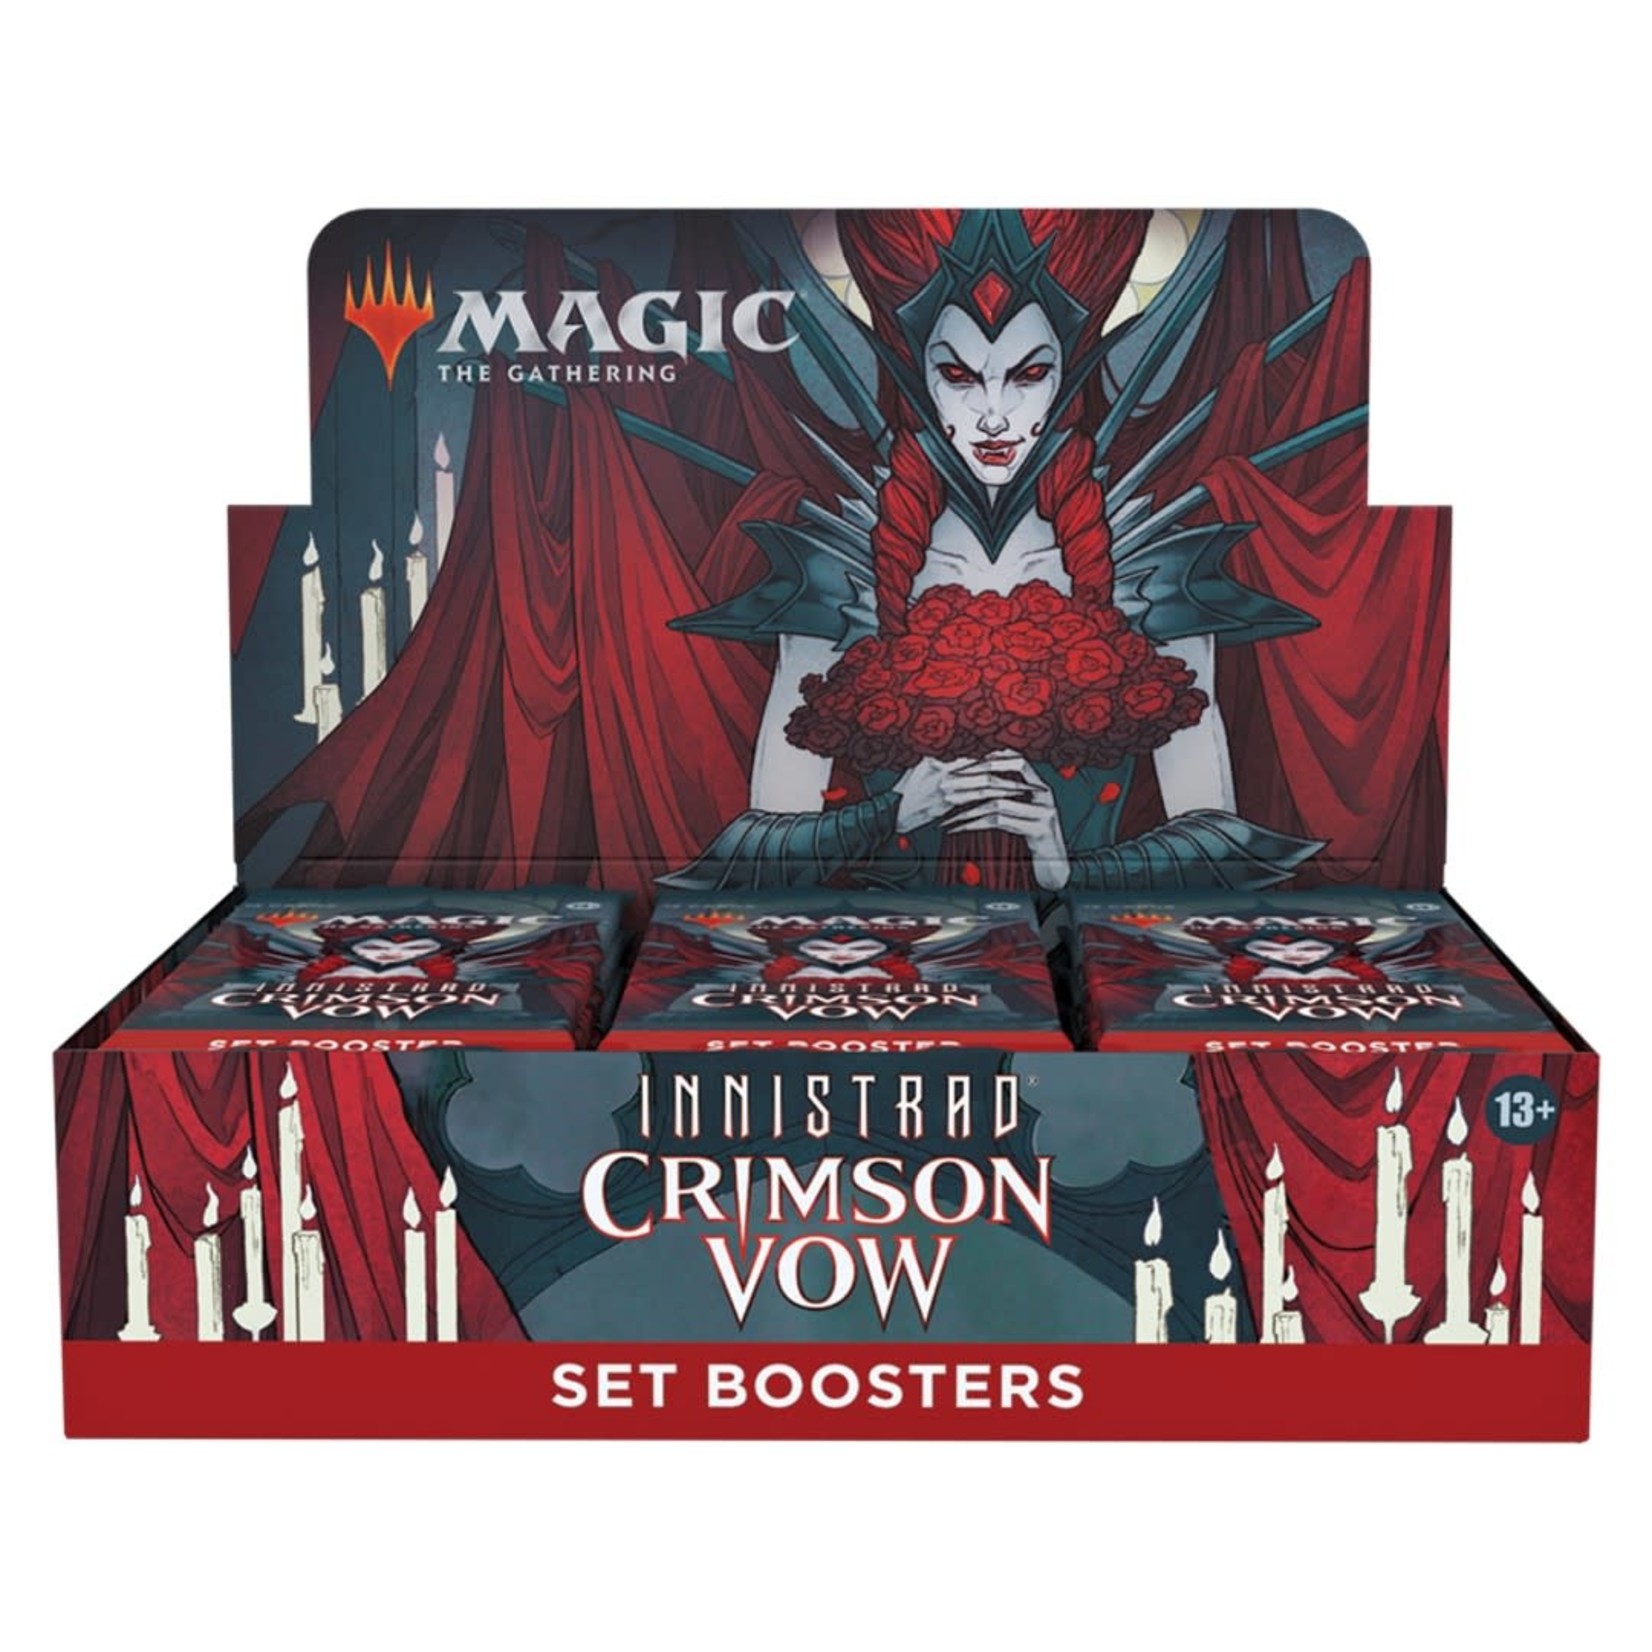 Wizards of the Coast Magic the Gathering Innistrad Crimson Vow VOW Set Booster Box